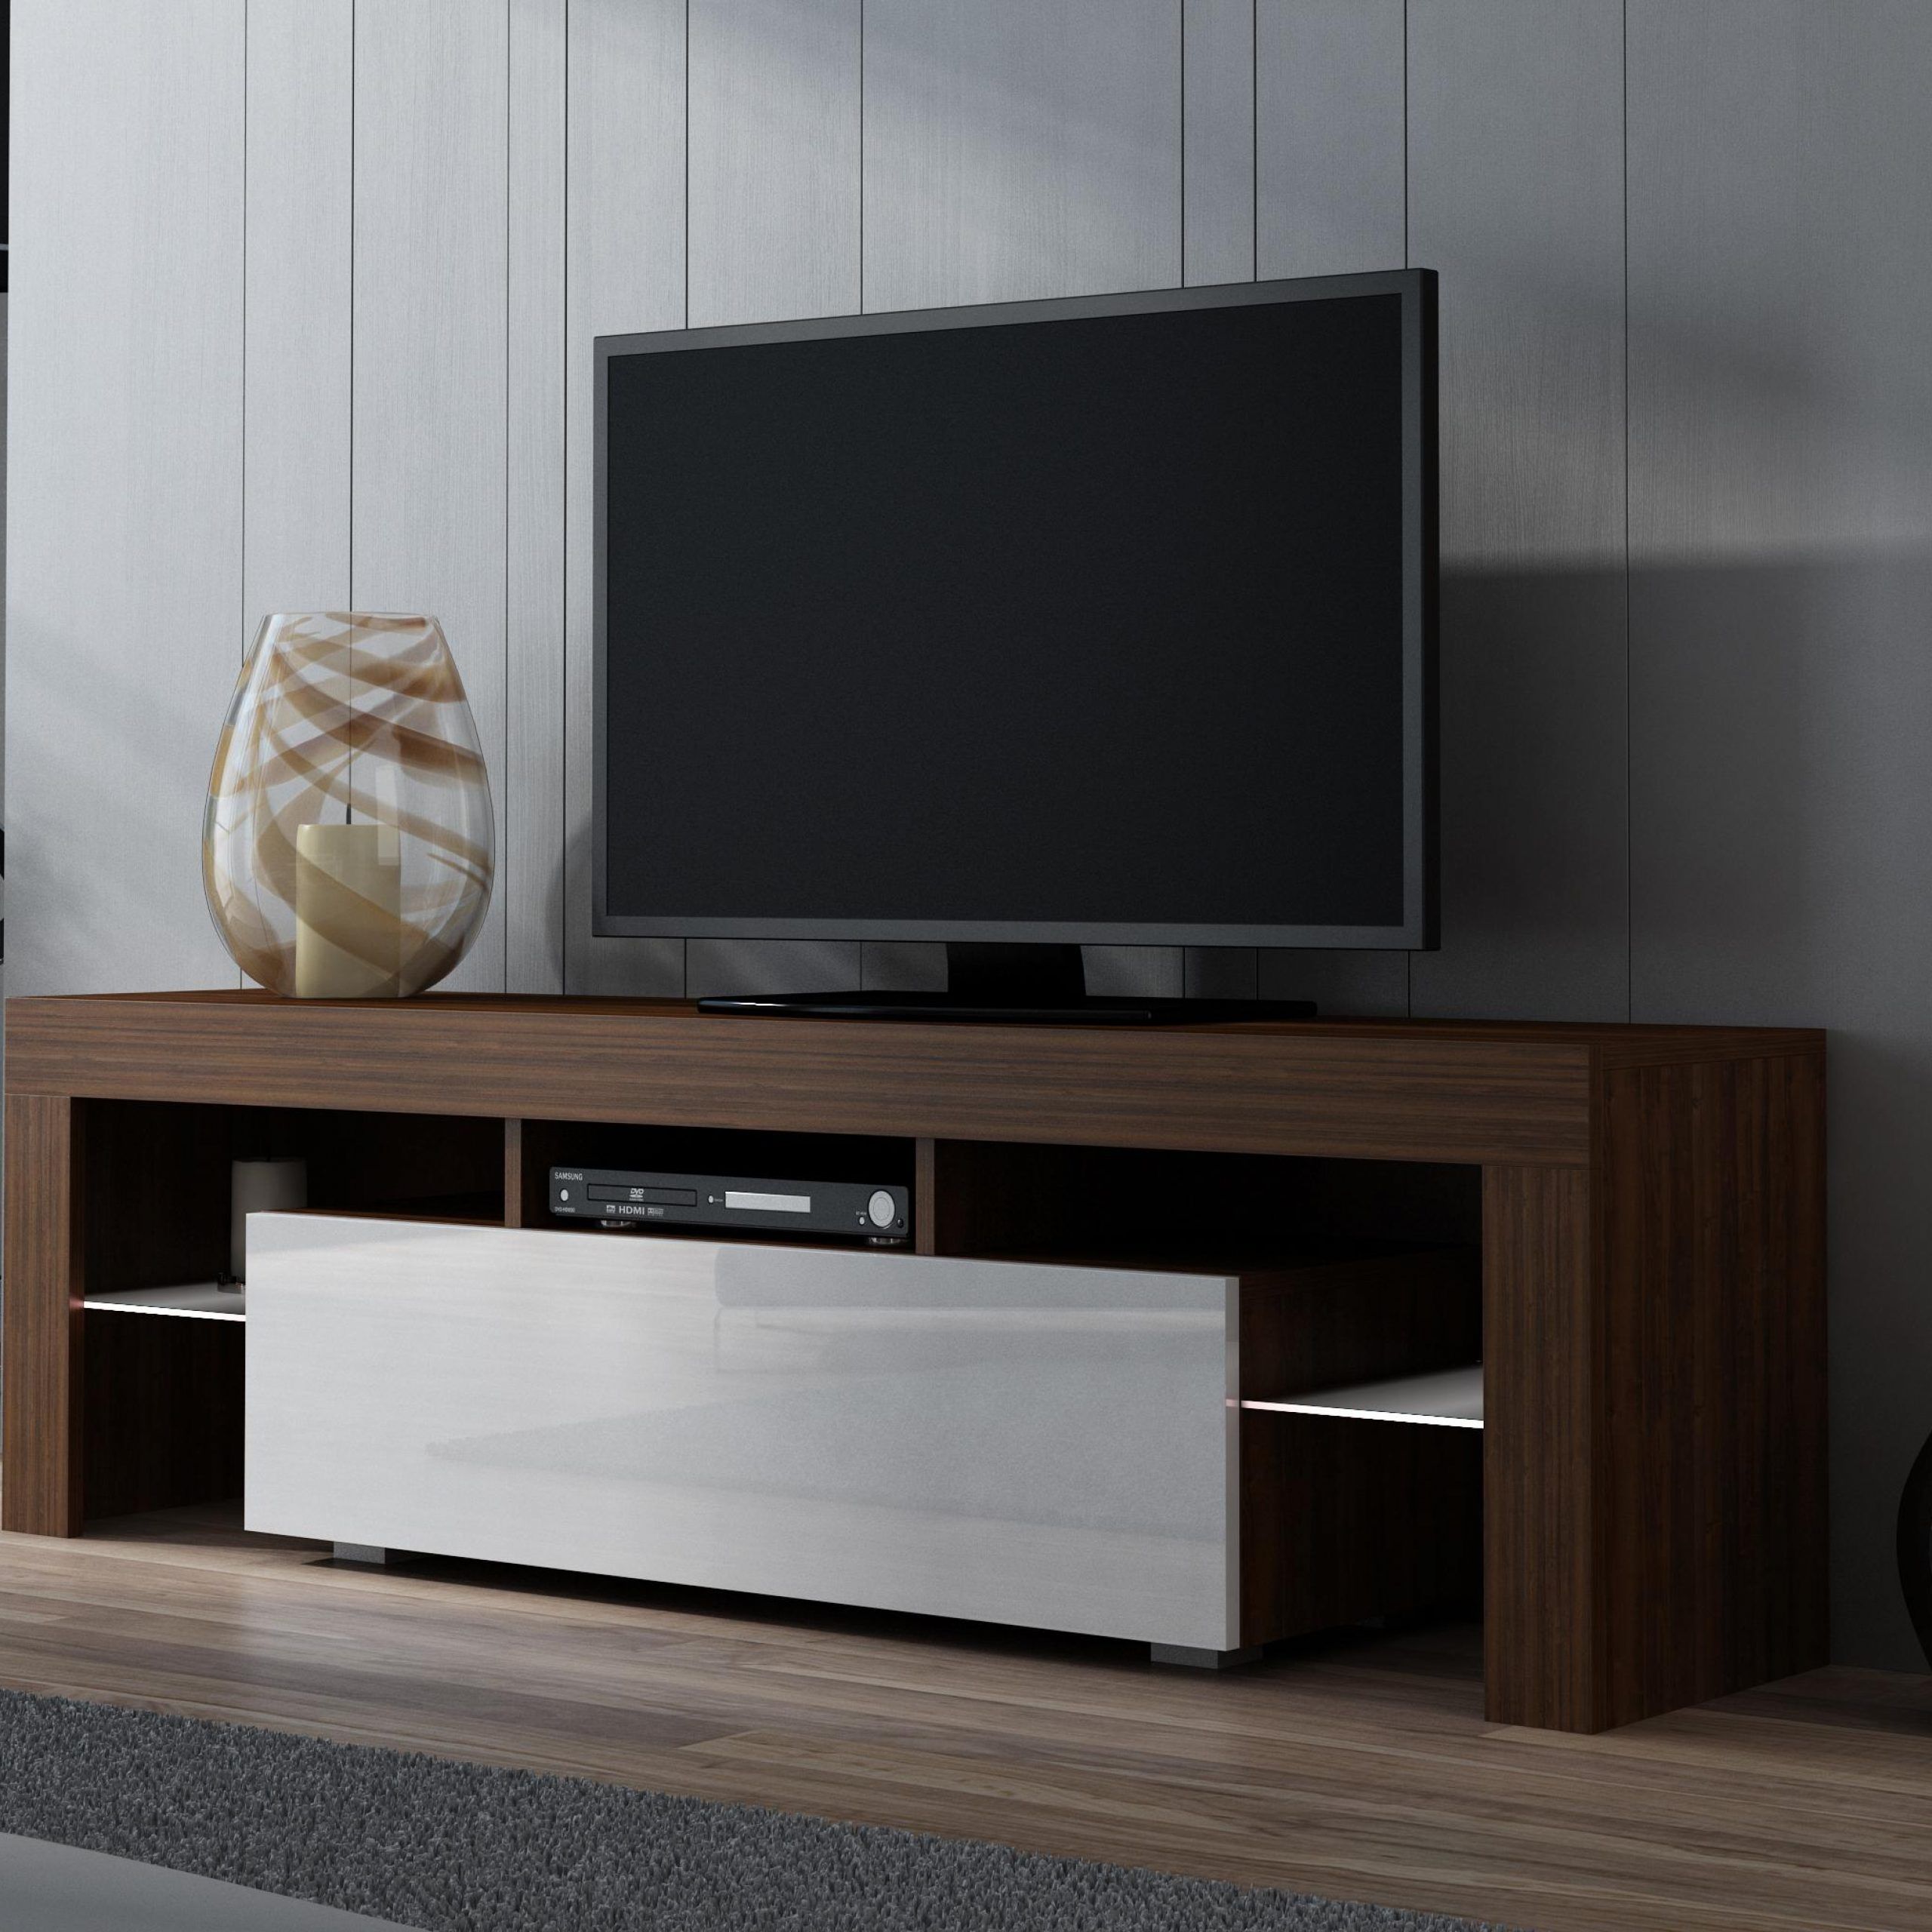 Milano 160 – Walnut Modern Tall Tv Stands For Flat Screens Throughout Modern Tv Cabinets For Flat Screens (View 2 of 15)